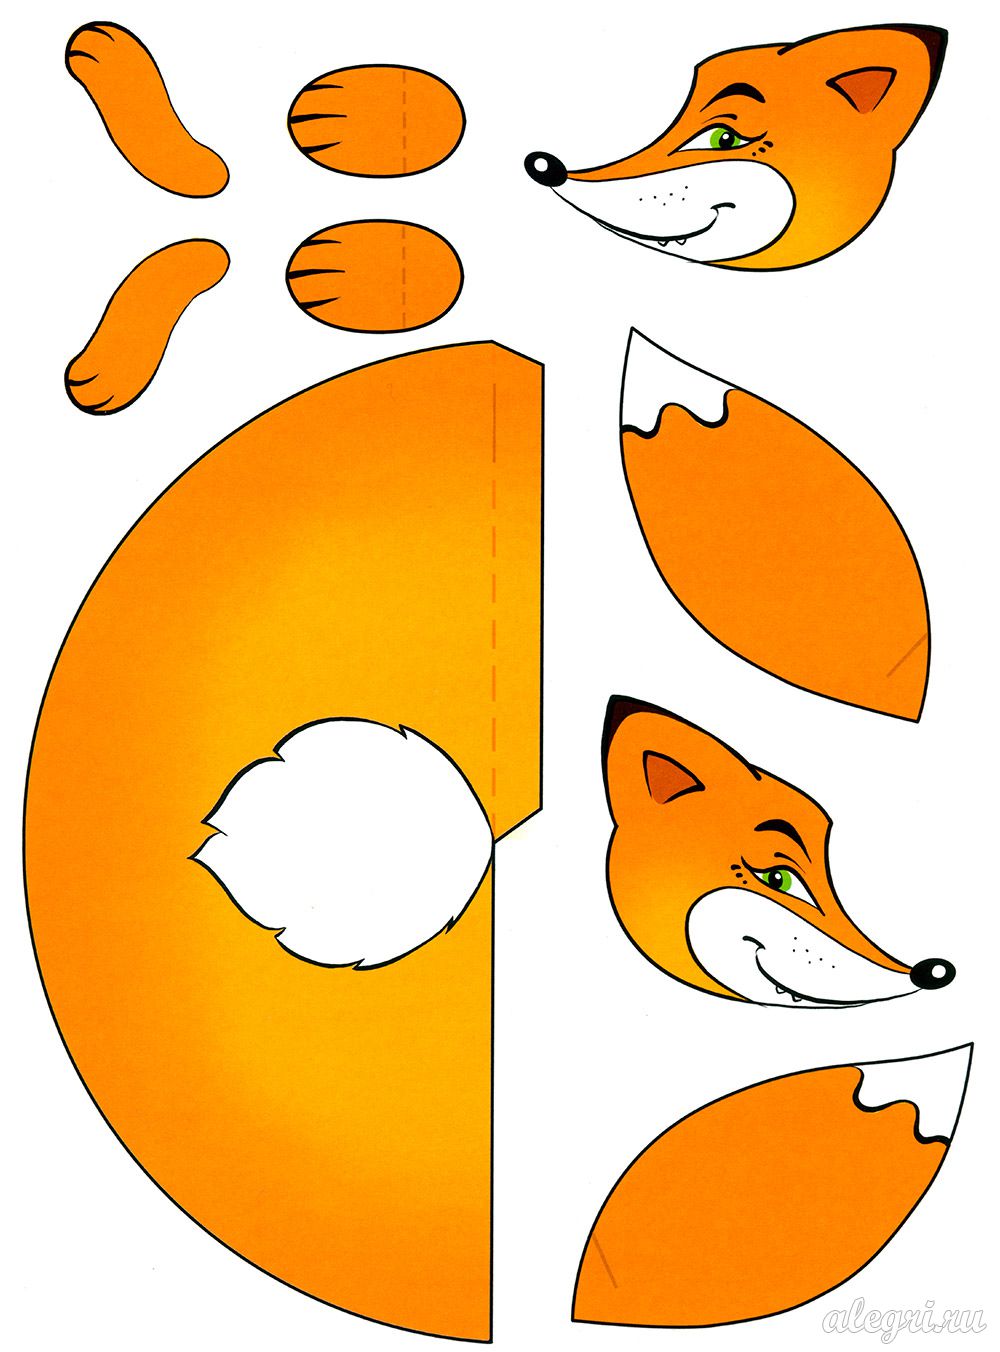 Ready-made template for fox from paper